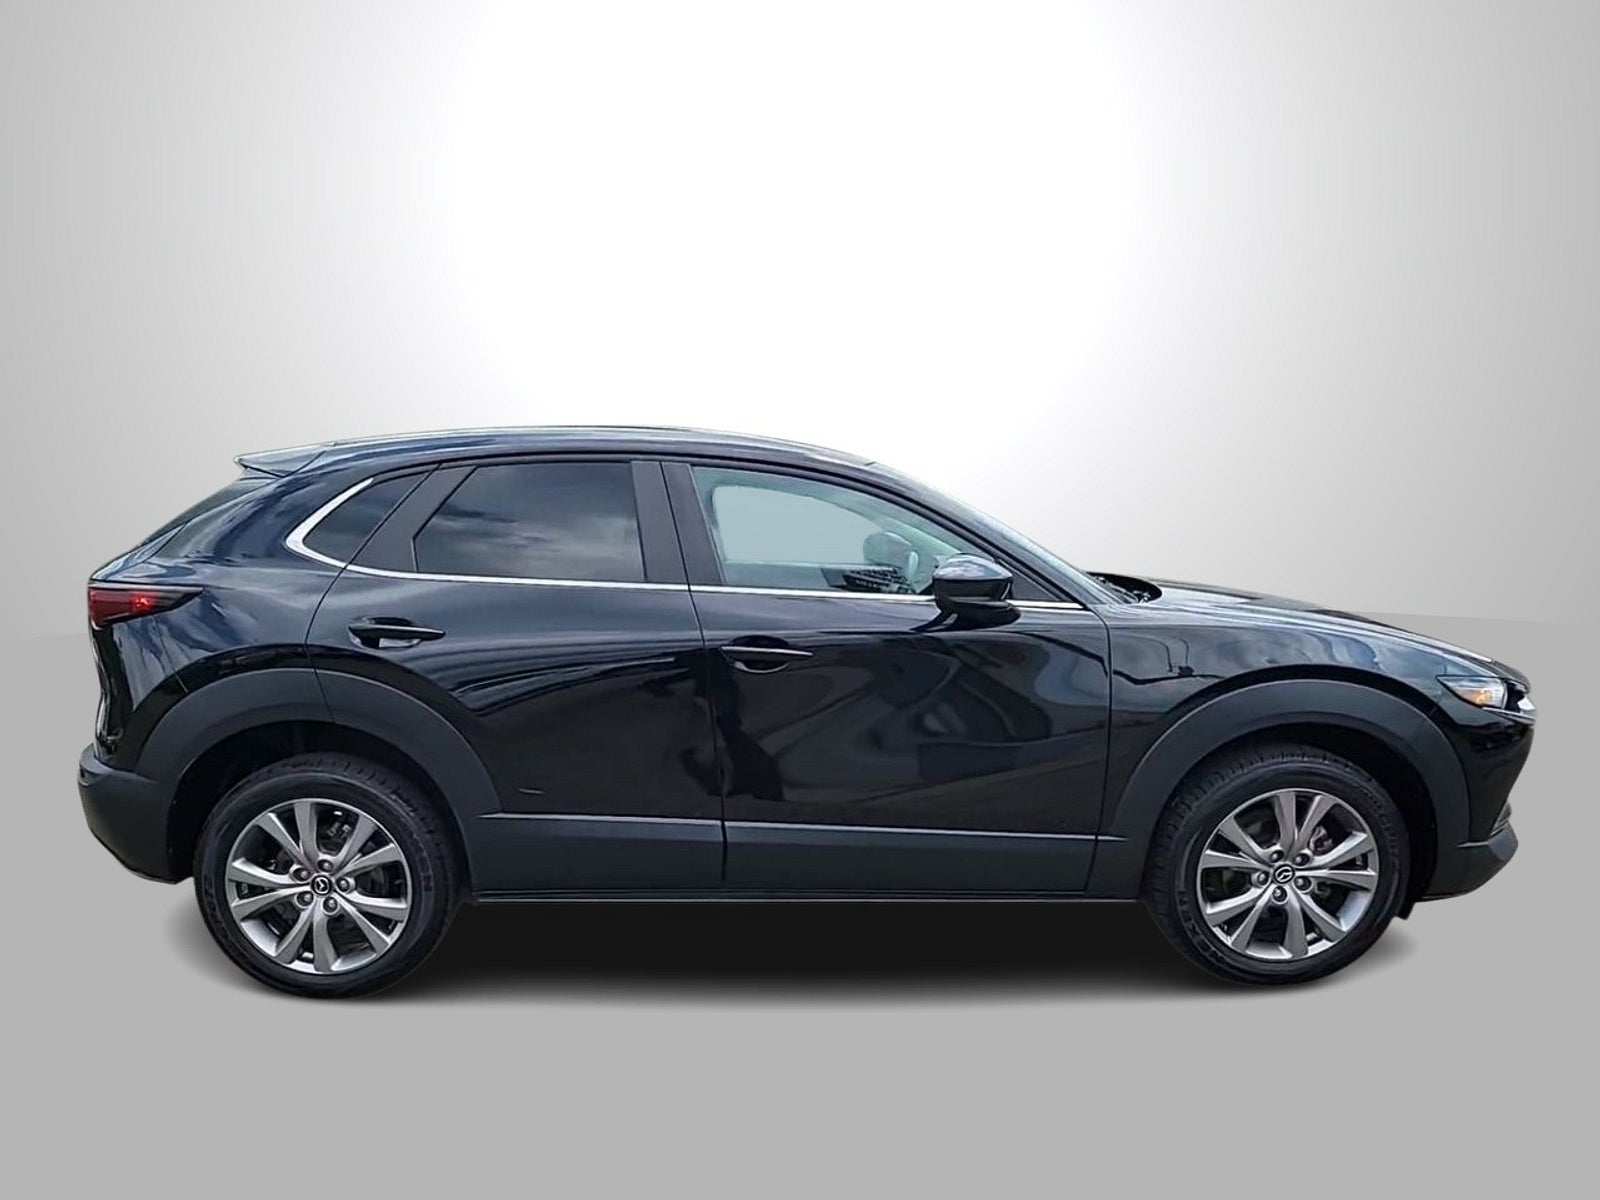 Used 2020 Mazda CX-30 Select with VIN 3MVDMBCL2LM116341 for sale in Shenandoah, PA